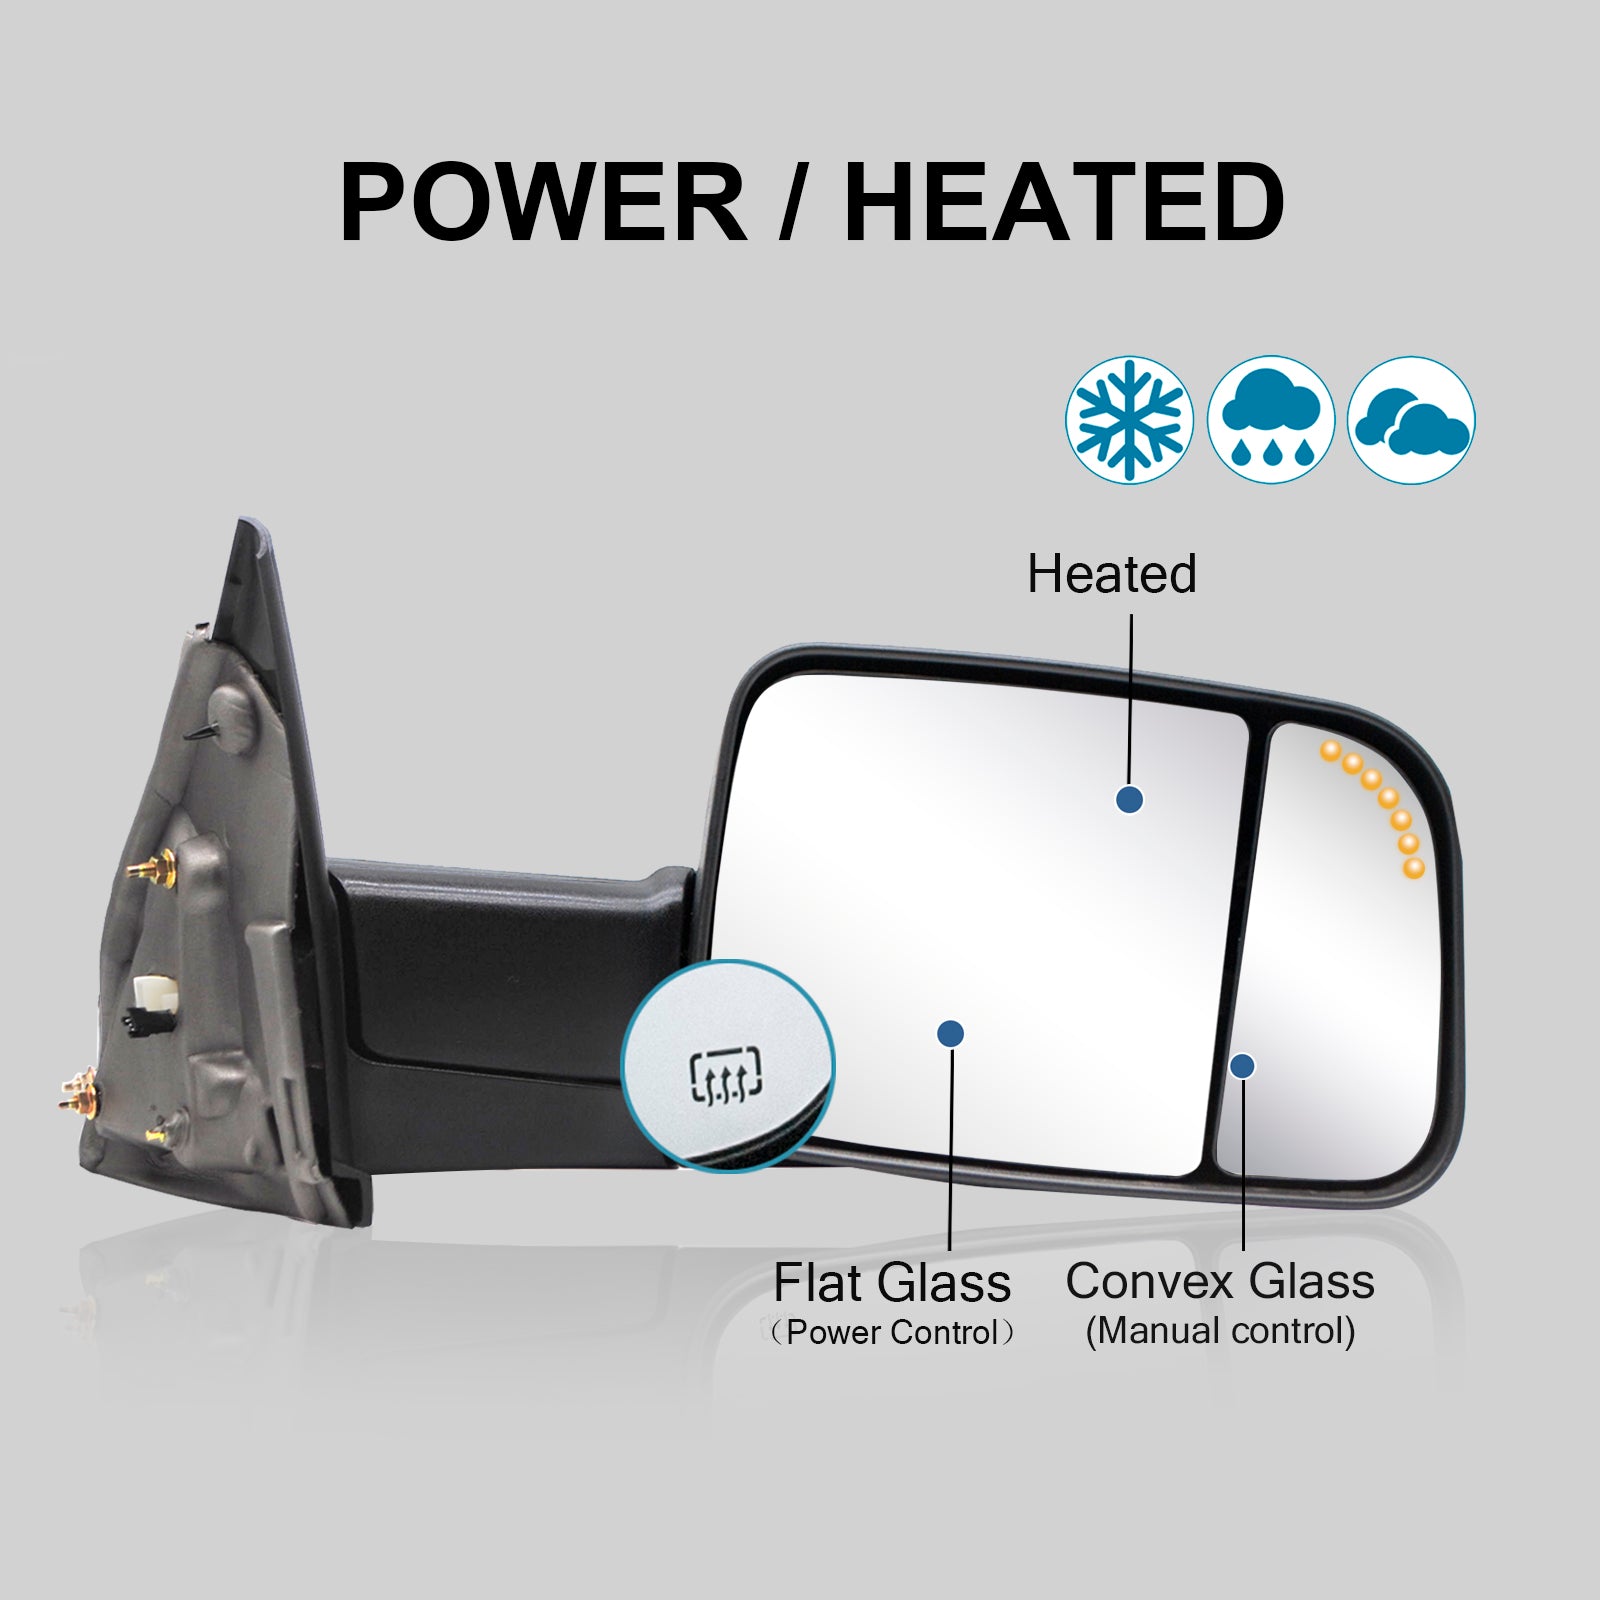 Towing Mirrors for 2002-2008 Dodge Ram 1500, 2003-2009 Dodge Ram 2500/3500 Pickup Truck, Power Heated Arrow Signal on Glass Puddle Lamp Manual Folding Black Housing 9B